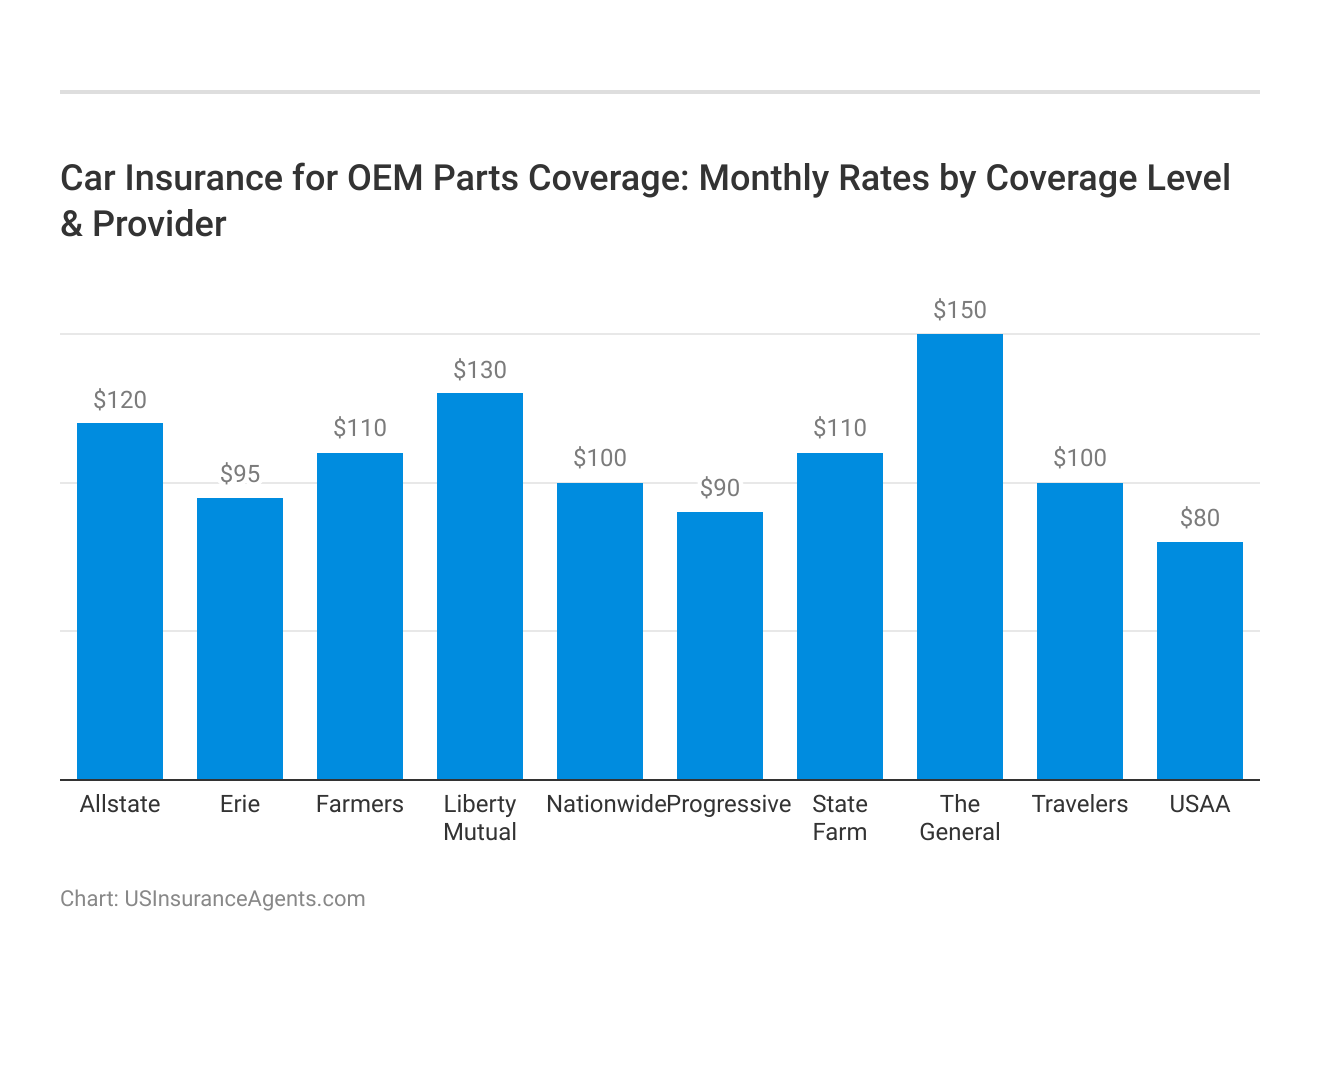 <h3>Car Insurance for OEM Parts Coverage: Monthly Rates by Coverage Level & Provider</h3>